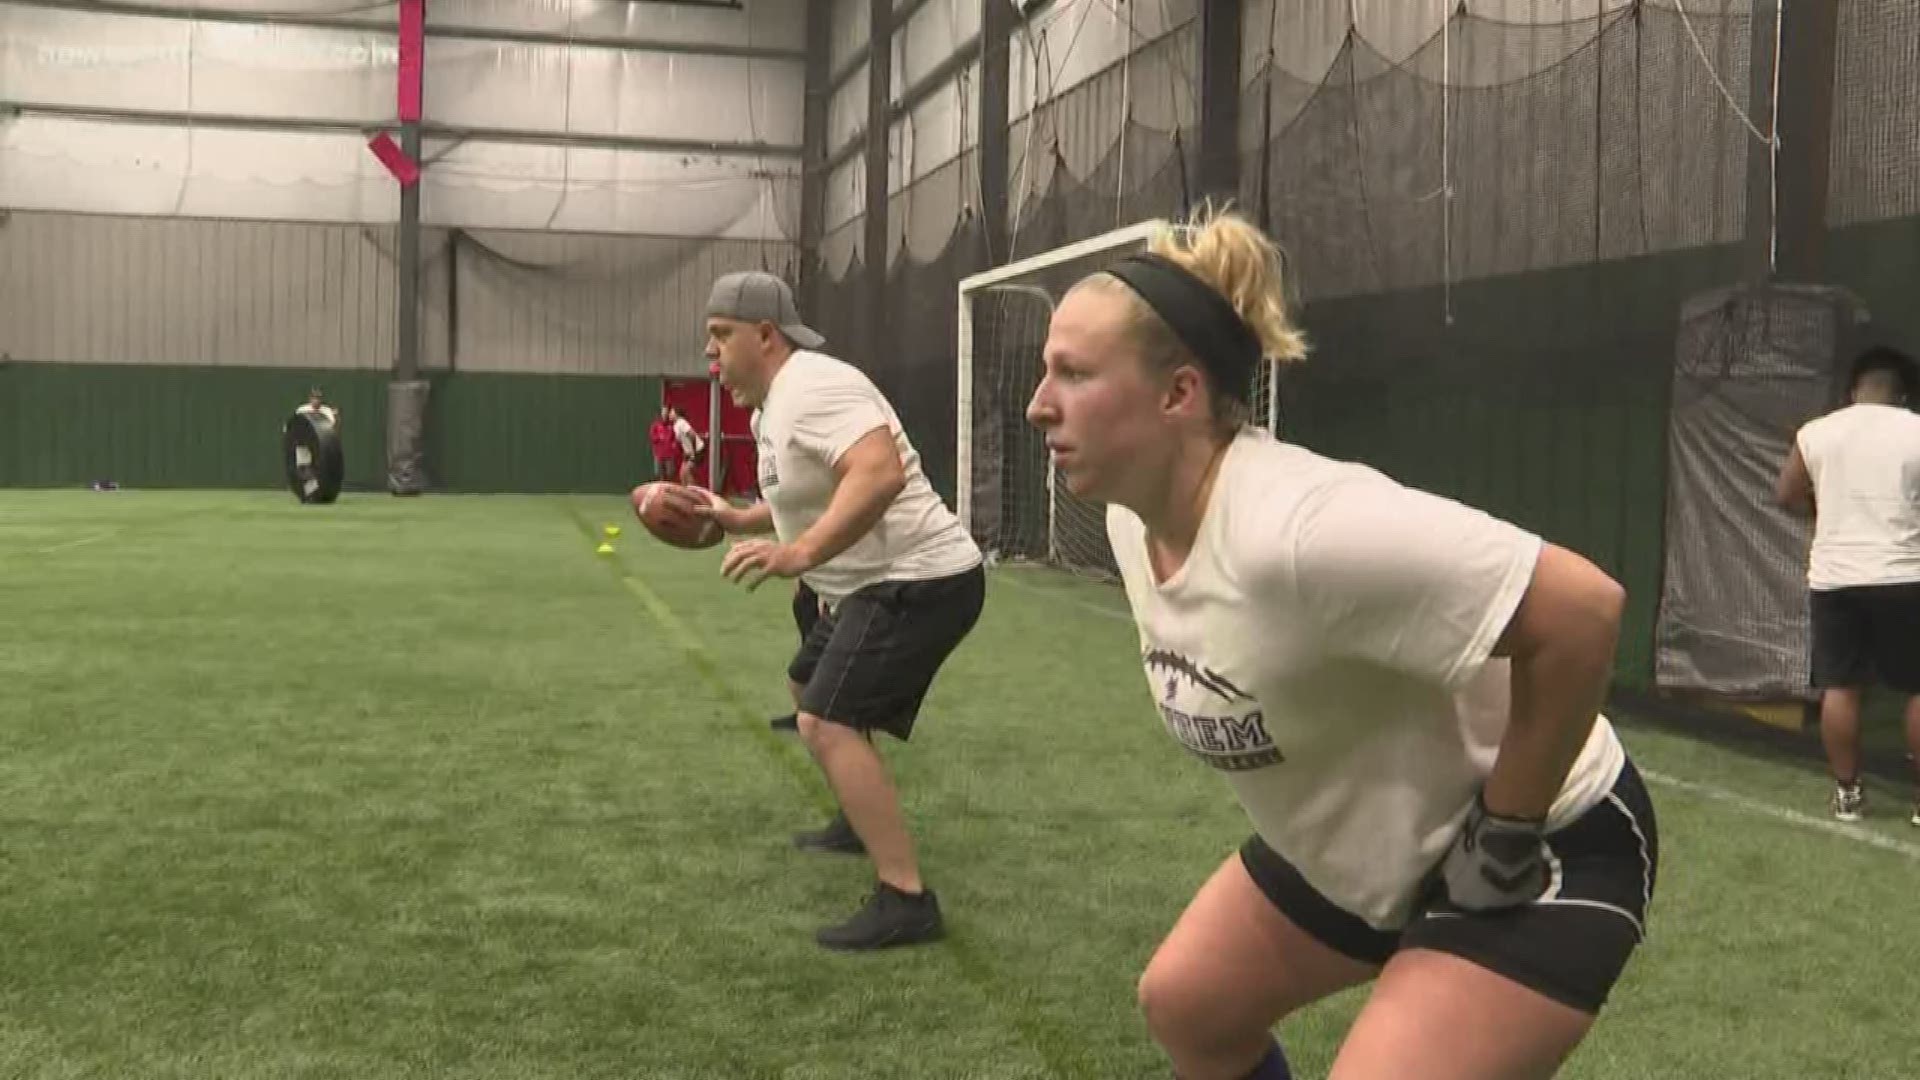 The full on tackle football team, the Maine Mayhem, is a professional women's team in Maine that's trying to get more women involved in the sport.